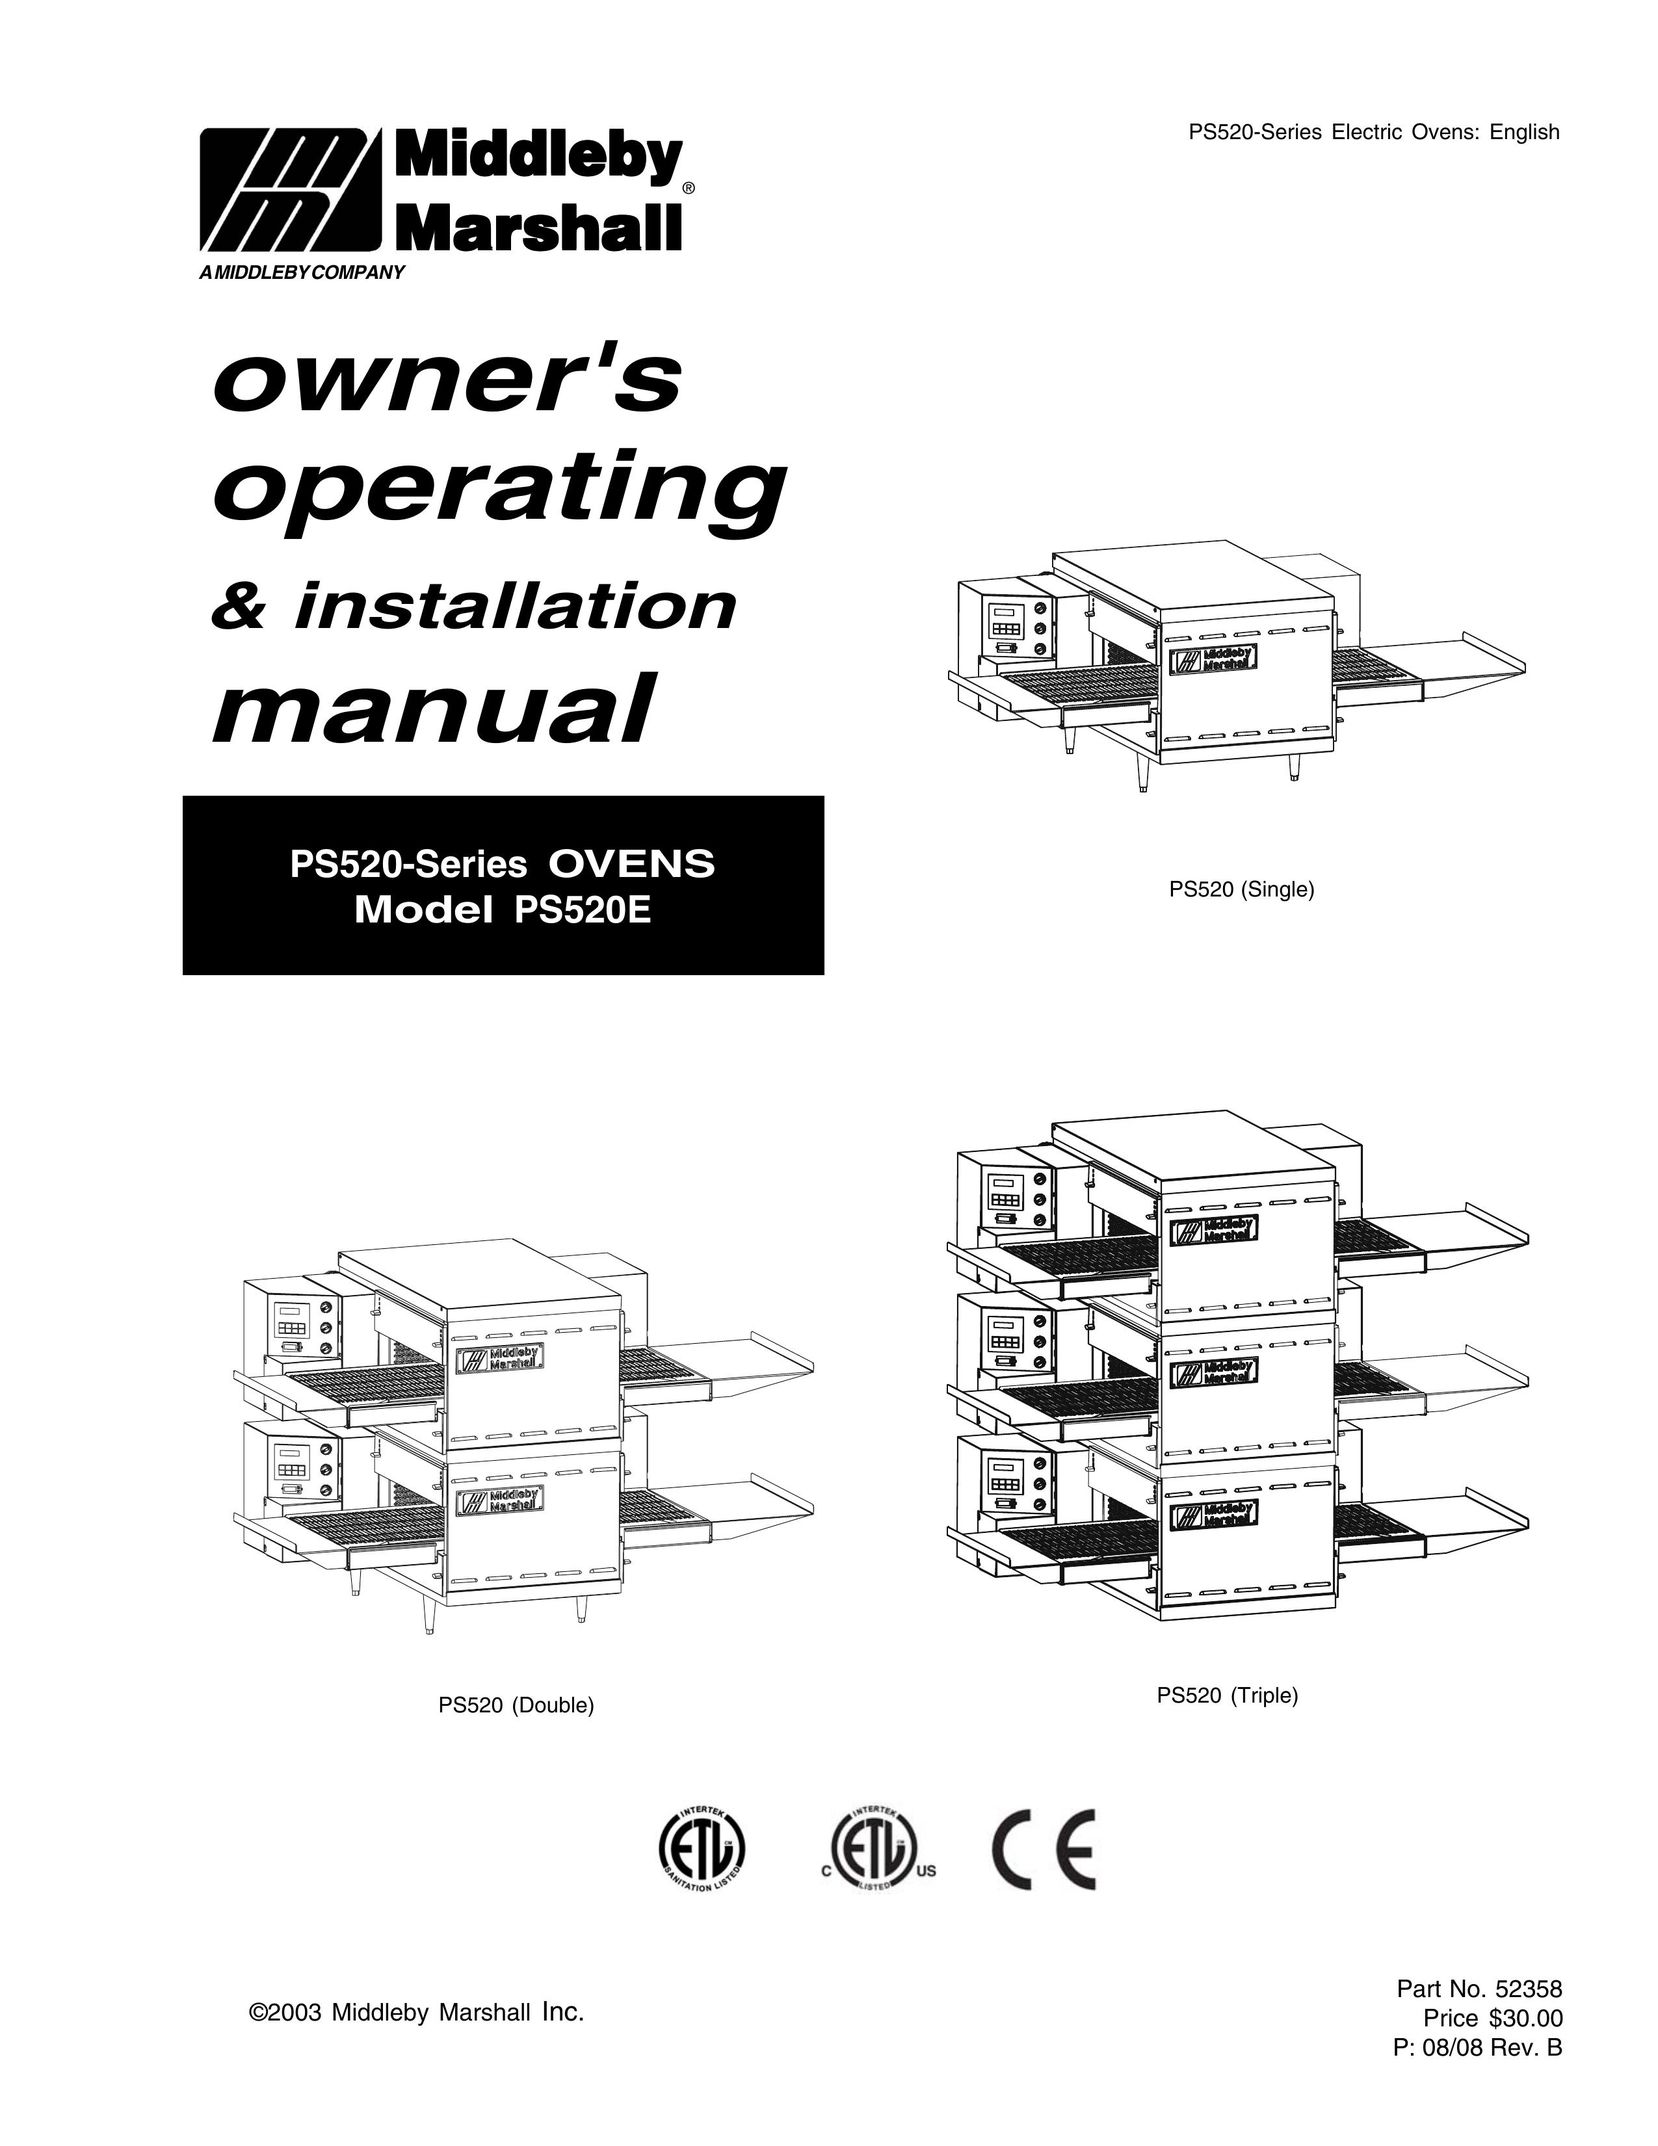 Middleby Marshall PS520 Oven User Manual